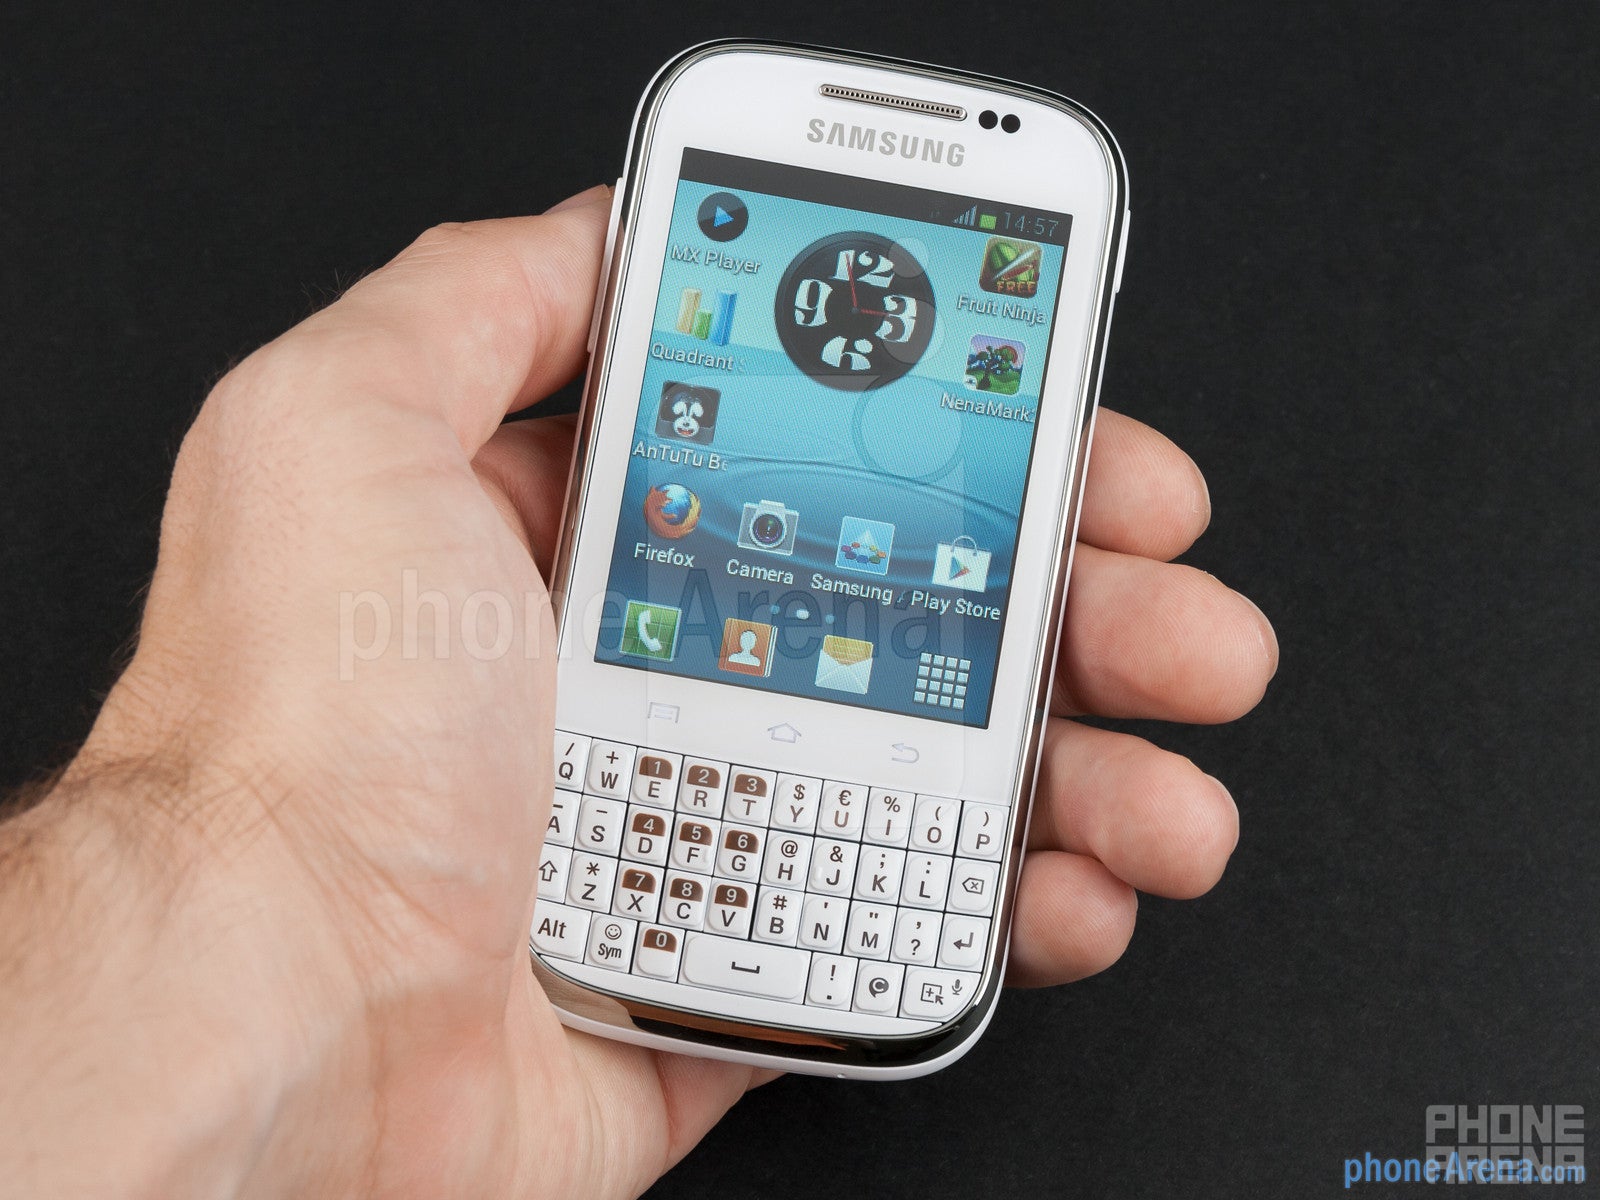 Samsung Galaxy Chat Review